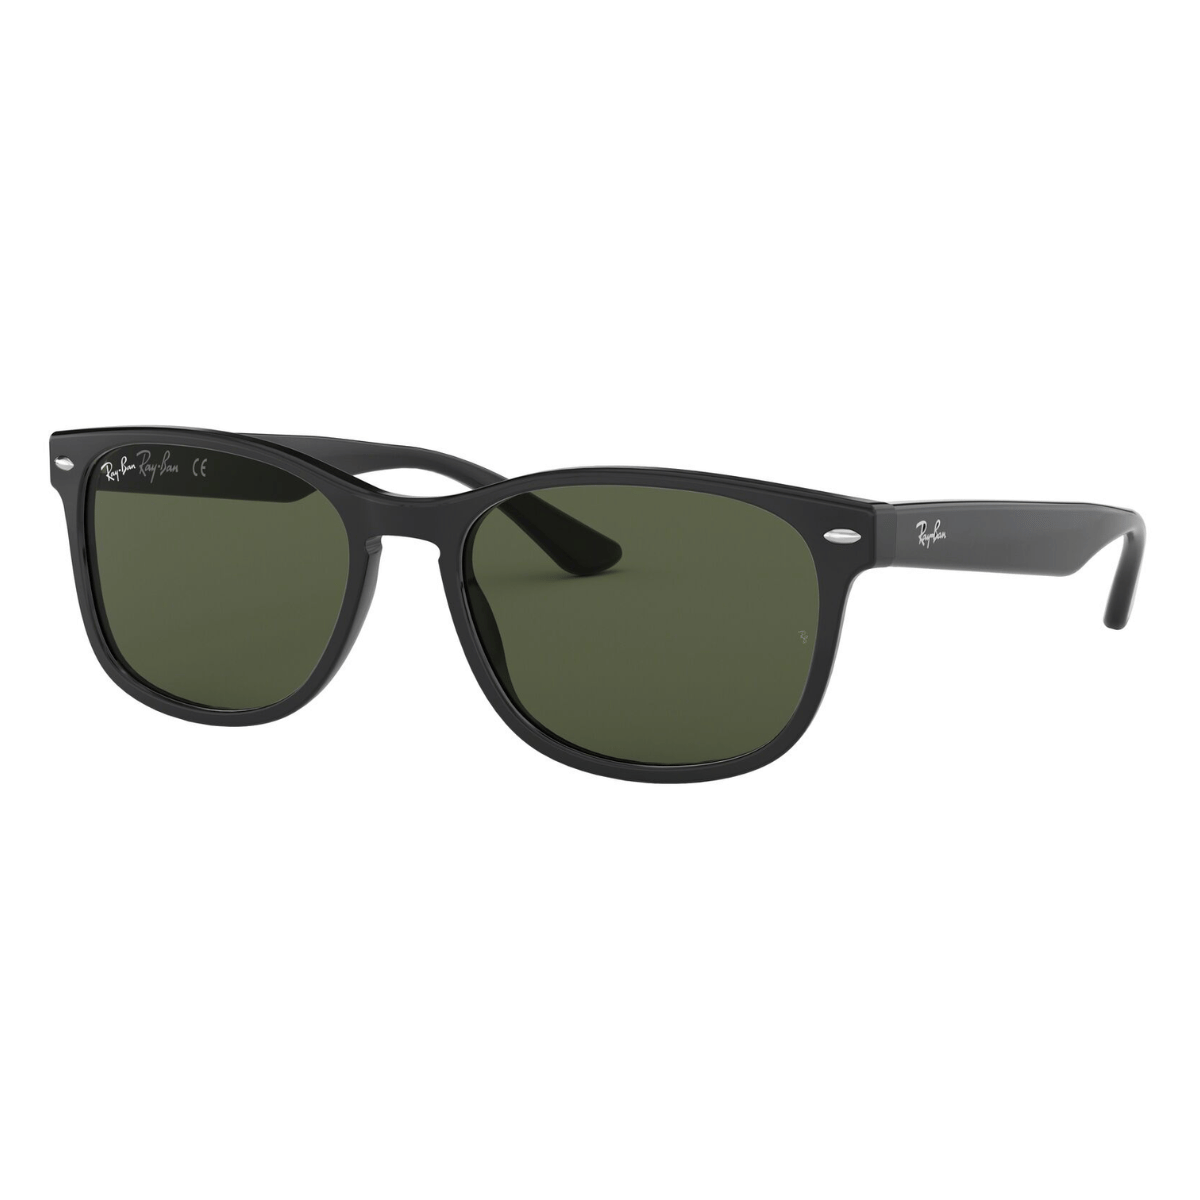 "Get Stylish Ray Ban Glasses: Discover the perfect pair of Ray Ban 2184 Sunglasses for men and women at Optorium. Benefit from free shipping on all wayfarer sunglasses orders. Elevate your eyewear game with Ray Ban's iconic style."